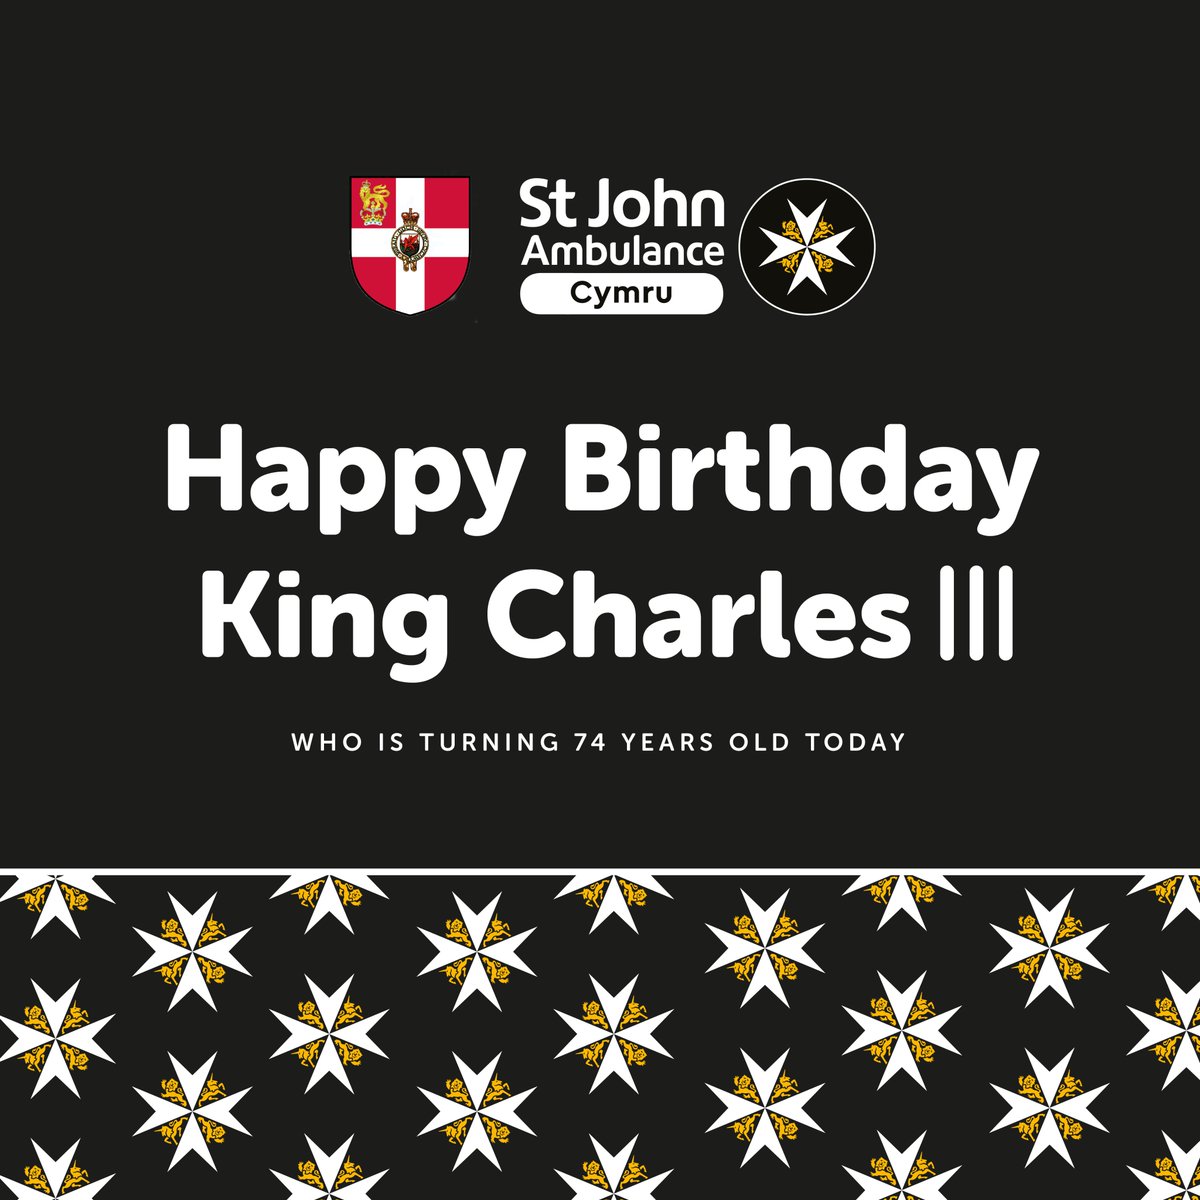 We would like to wish our Sovereign Head, HM King Charles III a very Happy Birthday.